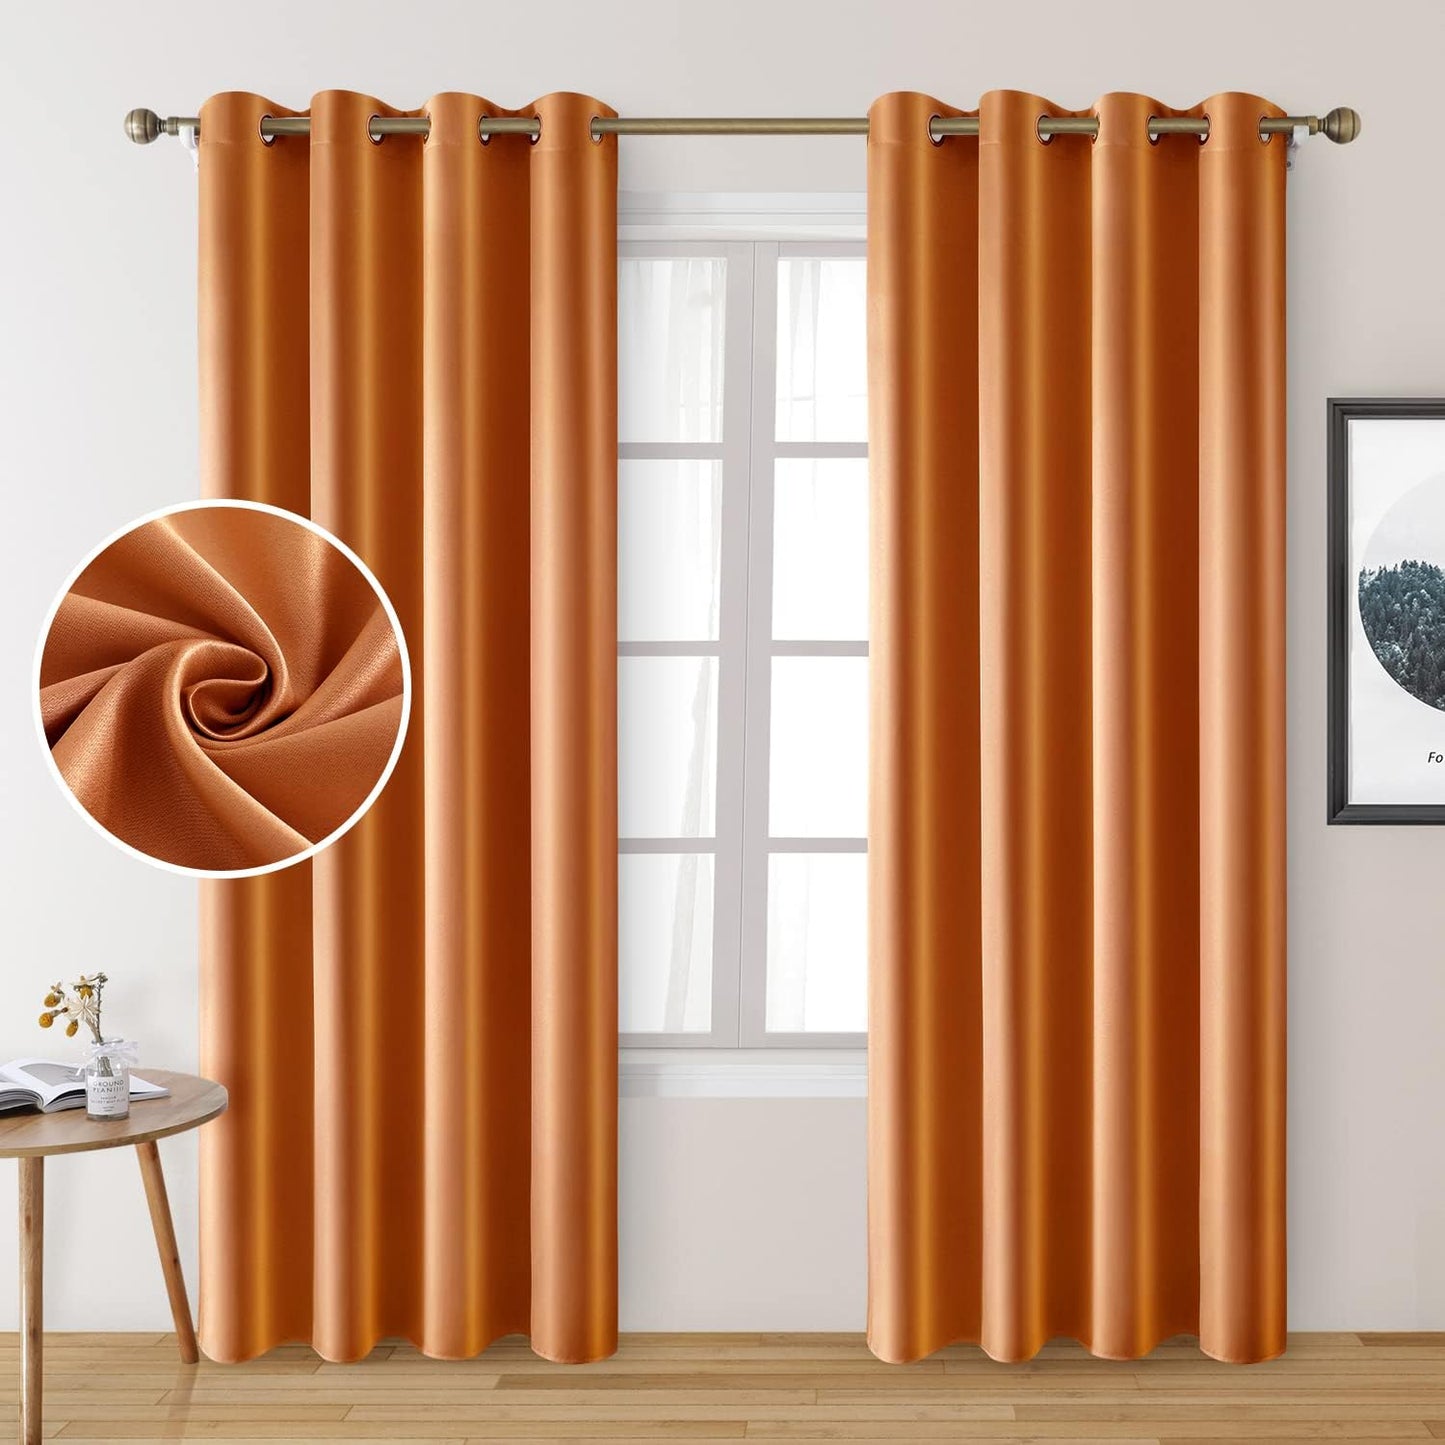 HOMEIDEAS Gold Blackout Curtains, Faux Silk for Bedroom 52 X 84 Inch Room Darkening Satin Thermal Insulated Drapes for Window, Indoor, Living Room, 2 Panels  HOMEIDEAS Orange 52" X 84" 